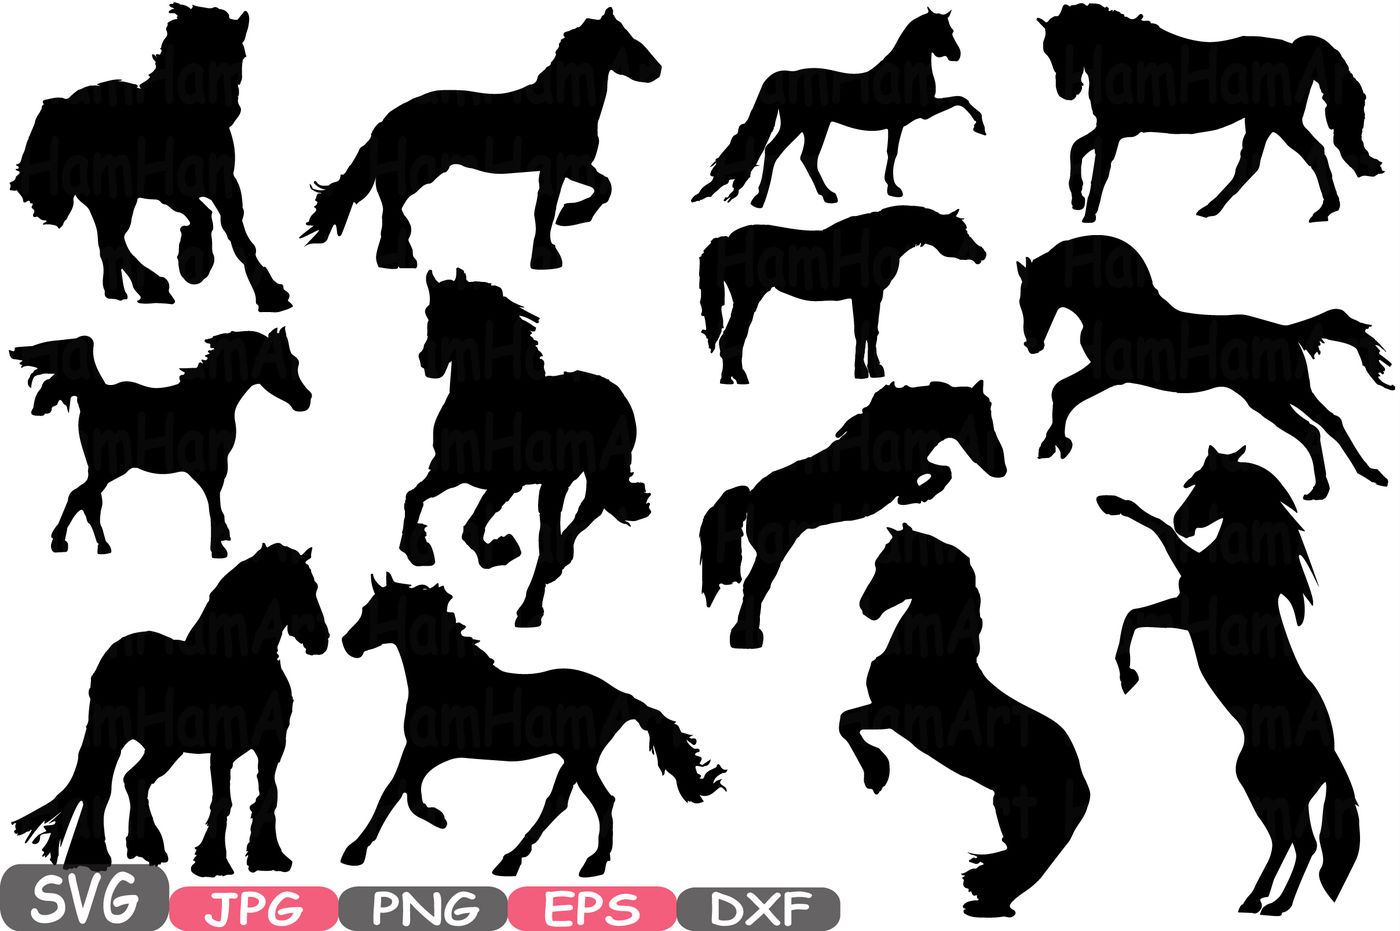 Wild Horses Mascot Woodland Monogram Horse Designs Silhouette Svg File Cutting Files Stickers School Clipart Dxf Cricut Zoo 663s By Hamhamart Thehungryjpeg Com